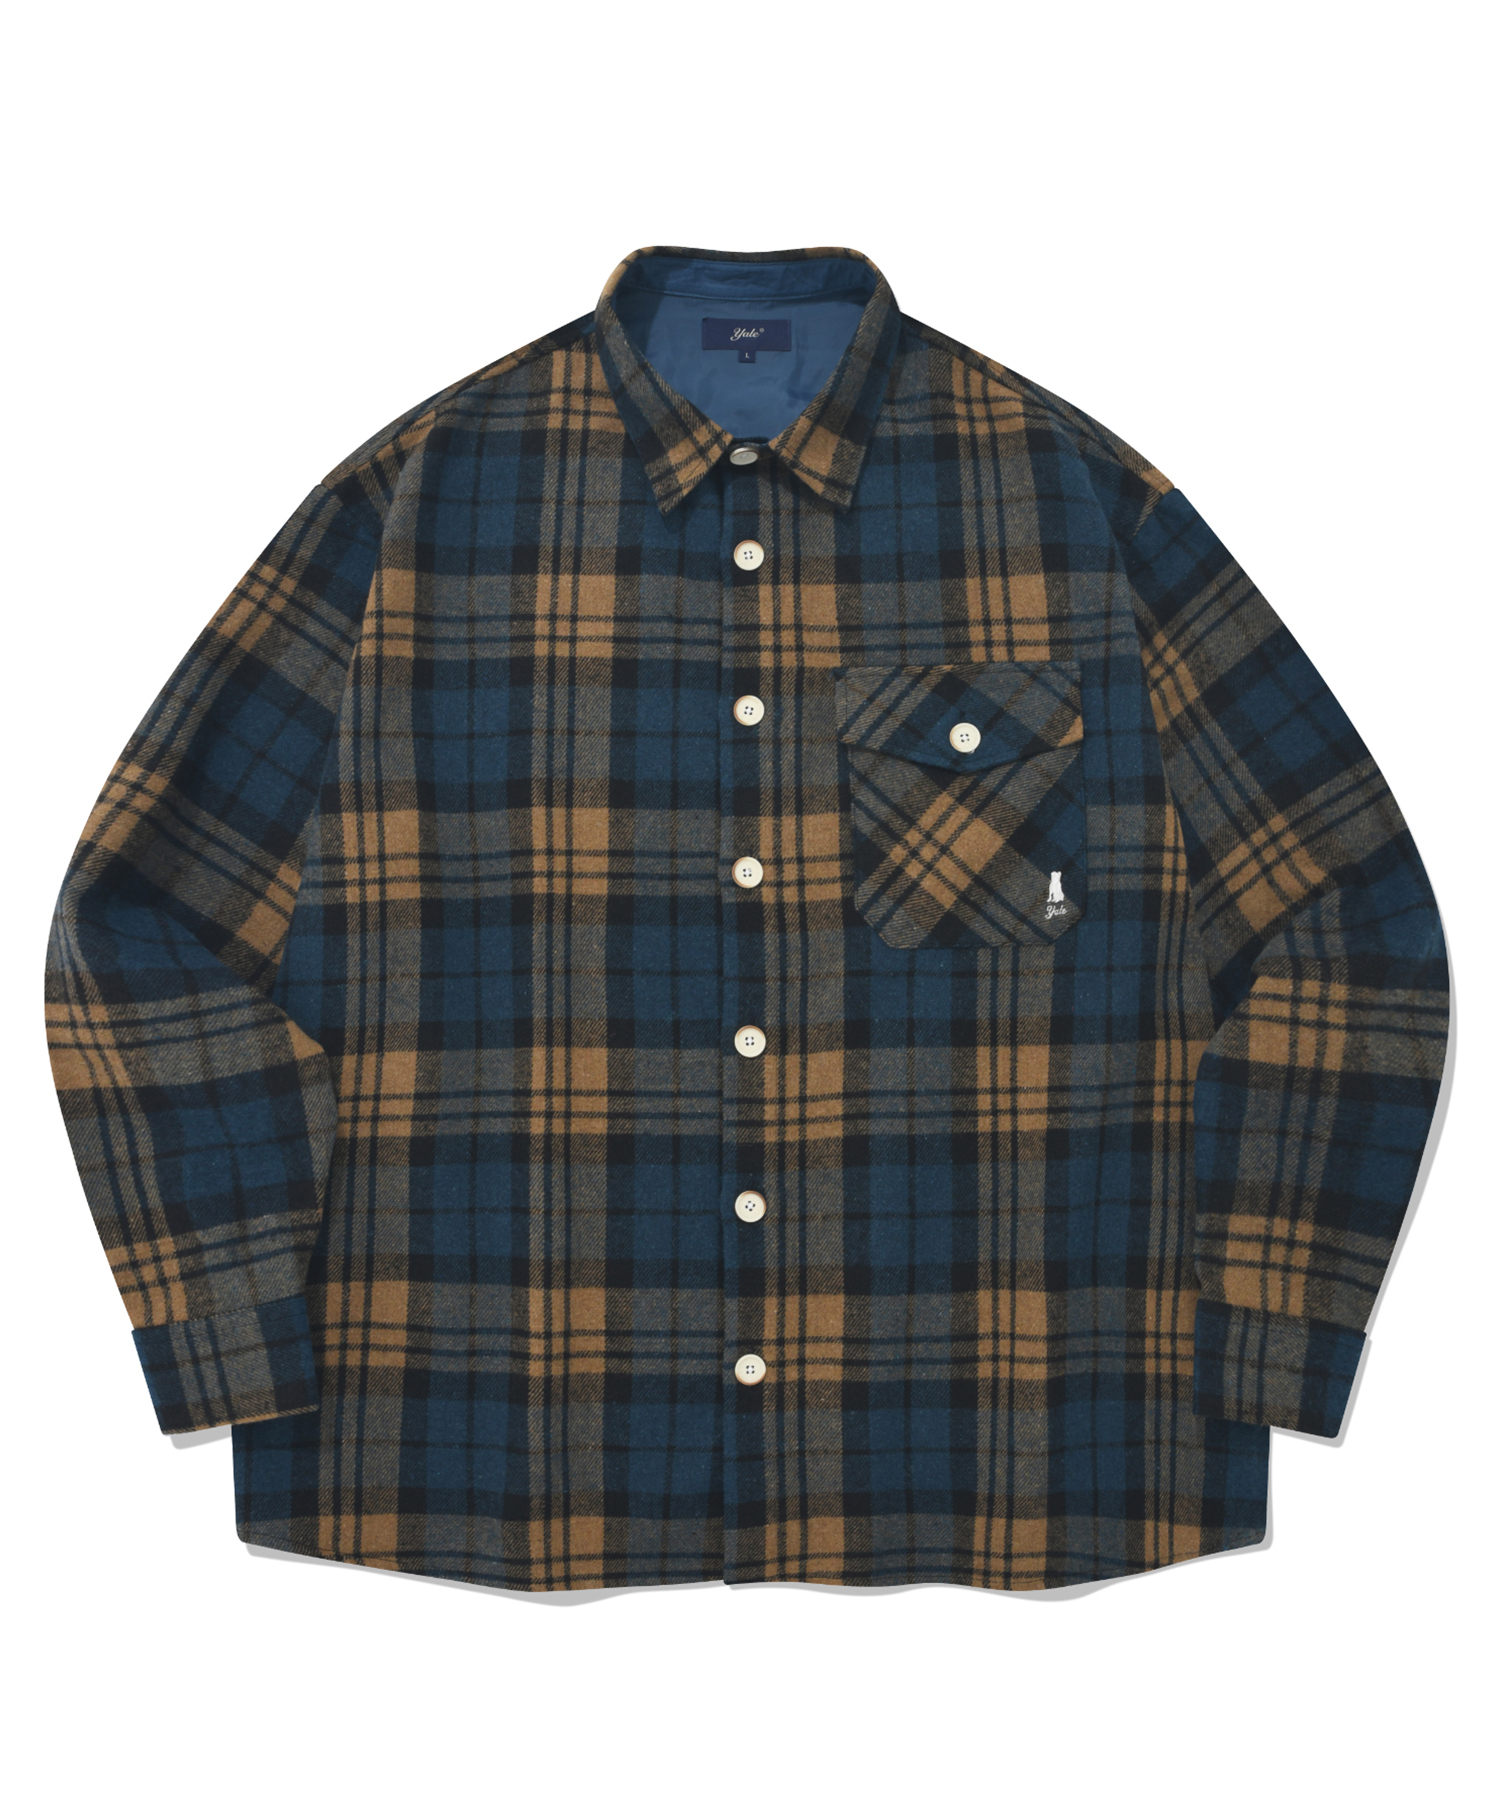 HEAVY FLANNEL ONE POCKET CHECK SHIRTS BLUE / YELLOW